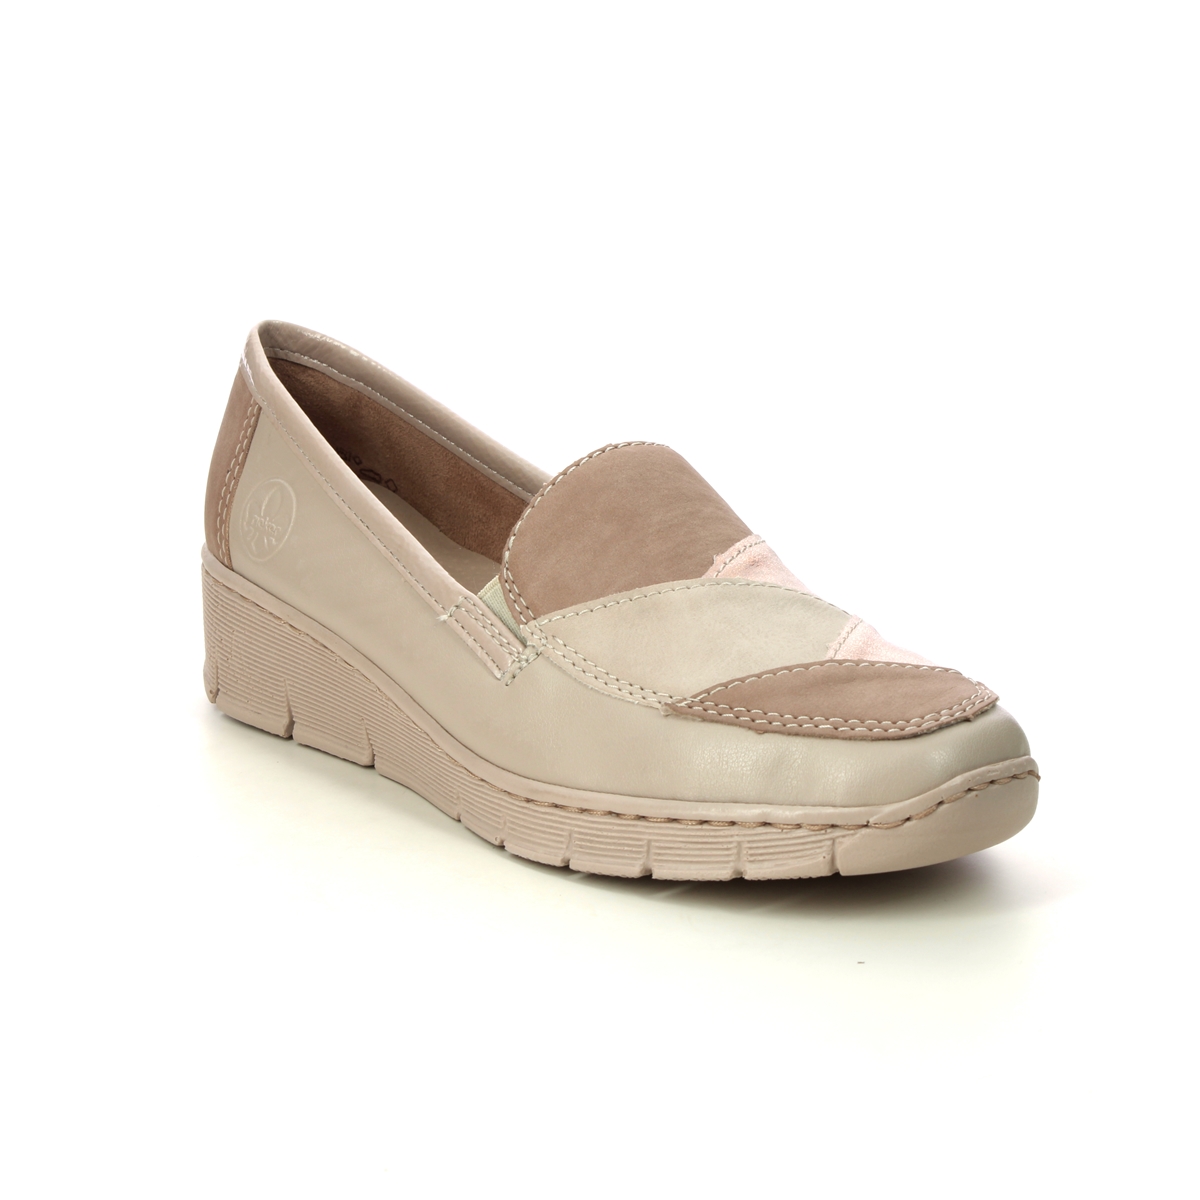 Rieker 53785-60 Beige Gold Womens Comfort Slip On Shoes in a Plain Man-made in Size 40